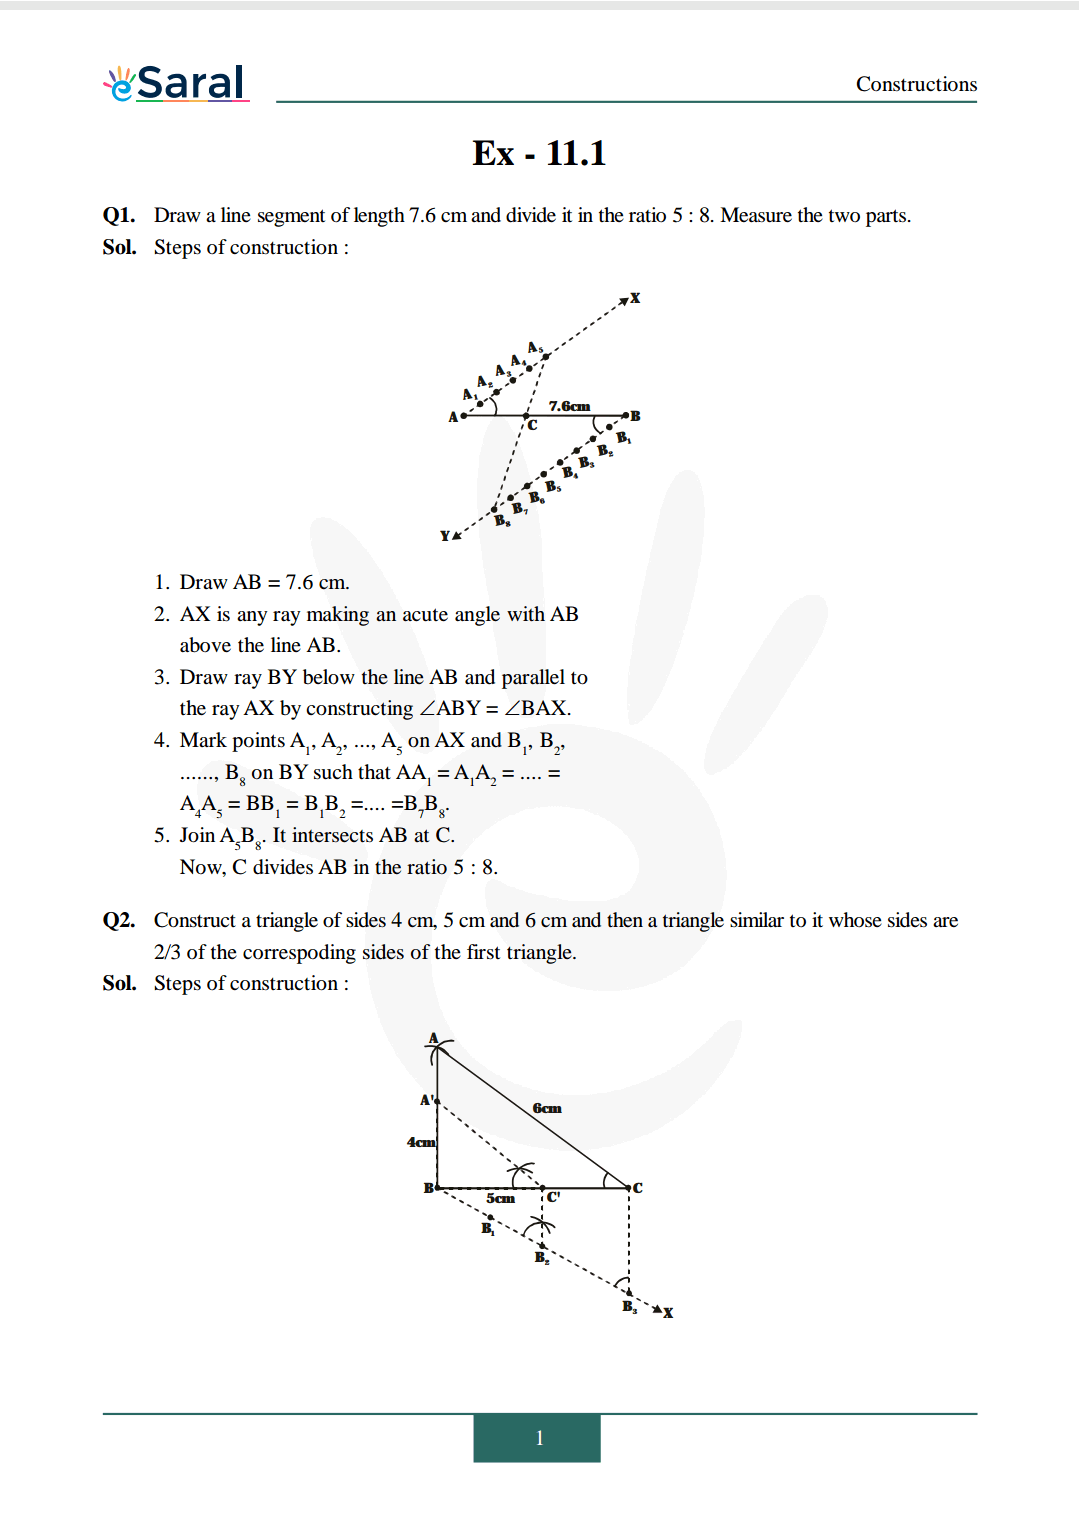 NCERT Solutions for Class 10 Maths chapter 11 Exercise 11.1 Image 1